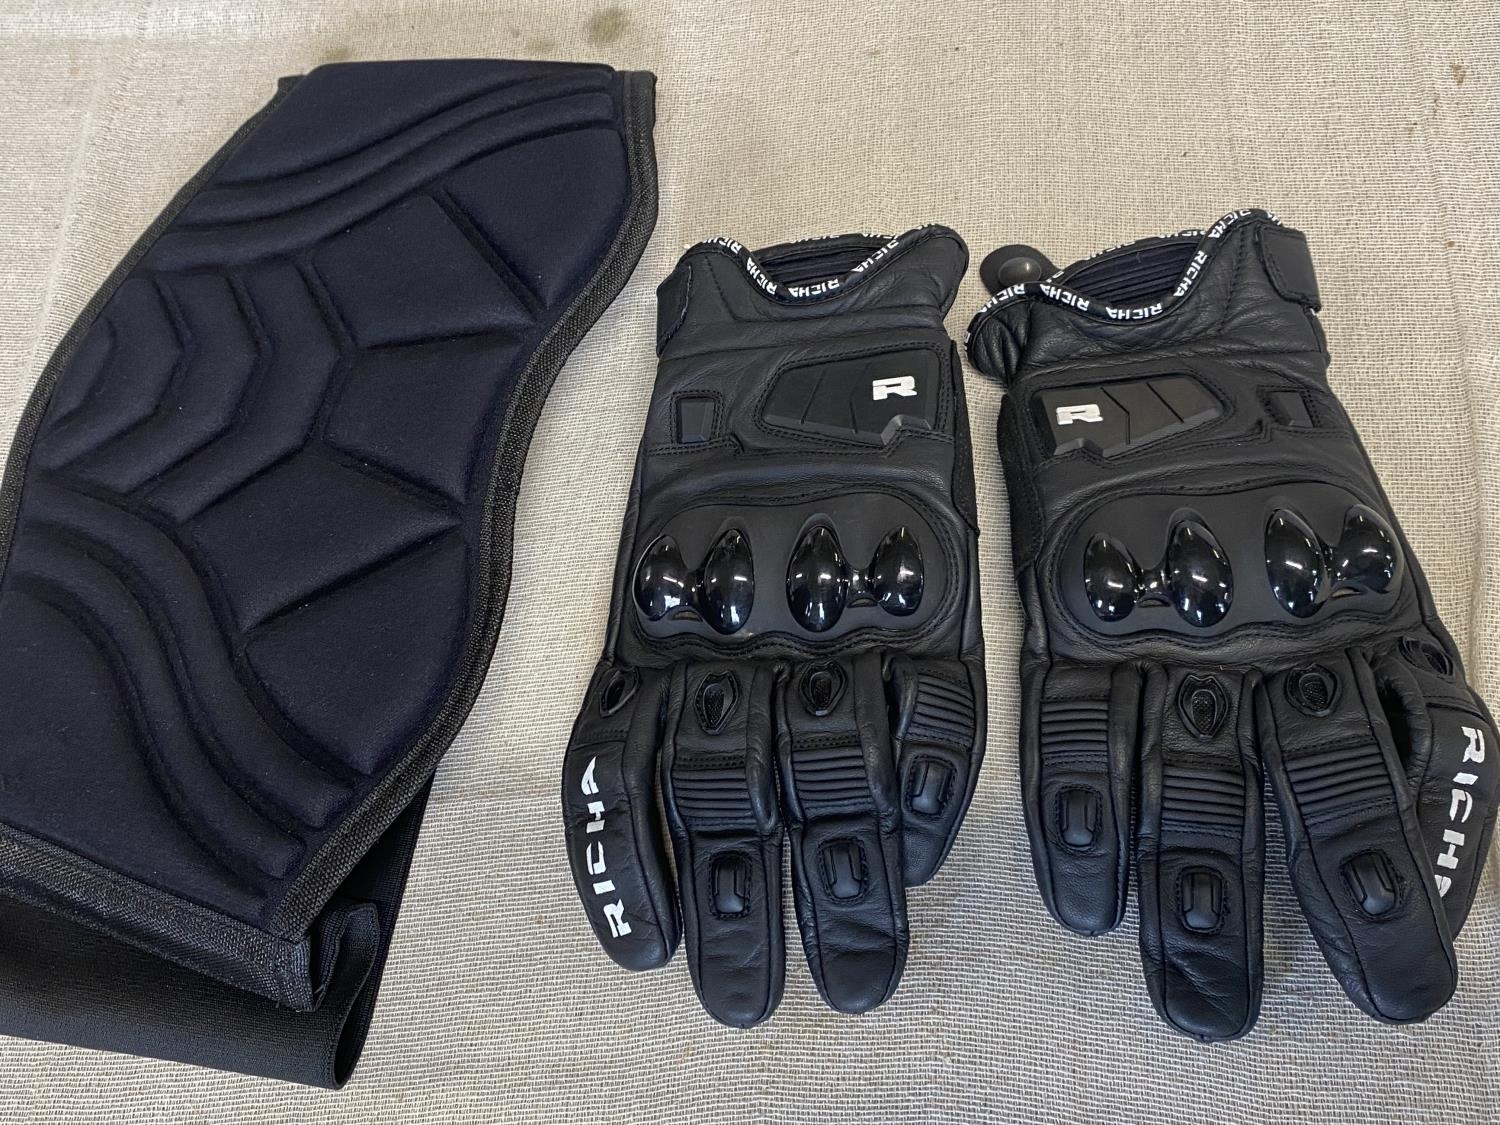 A pair of Riccha motorbike gloves and back brace